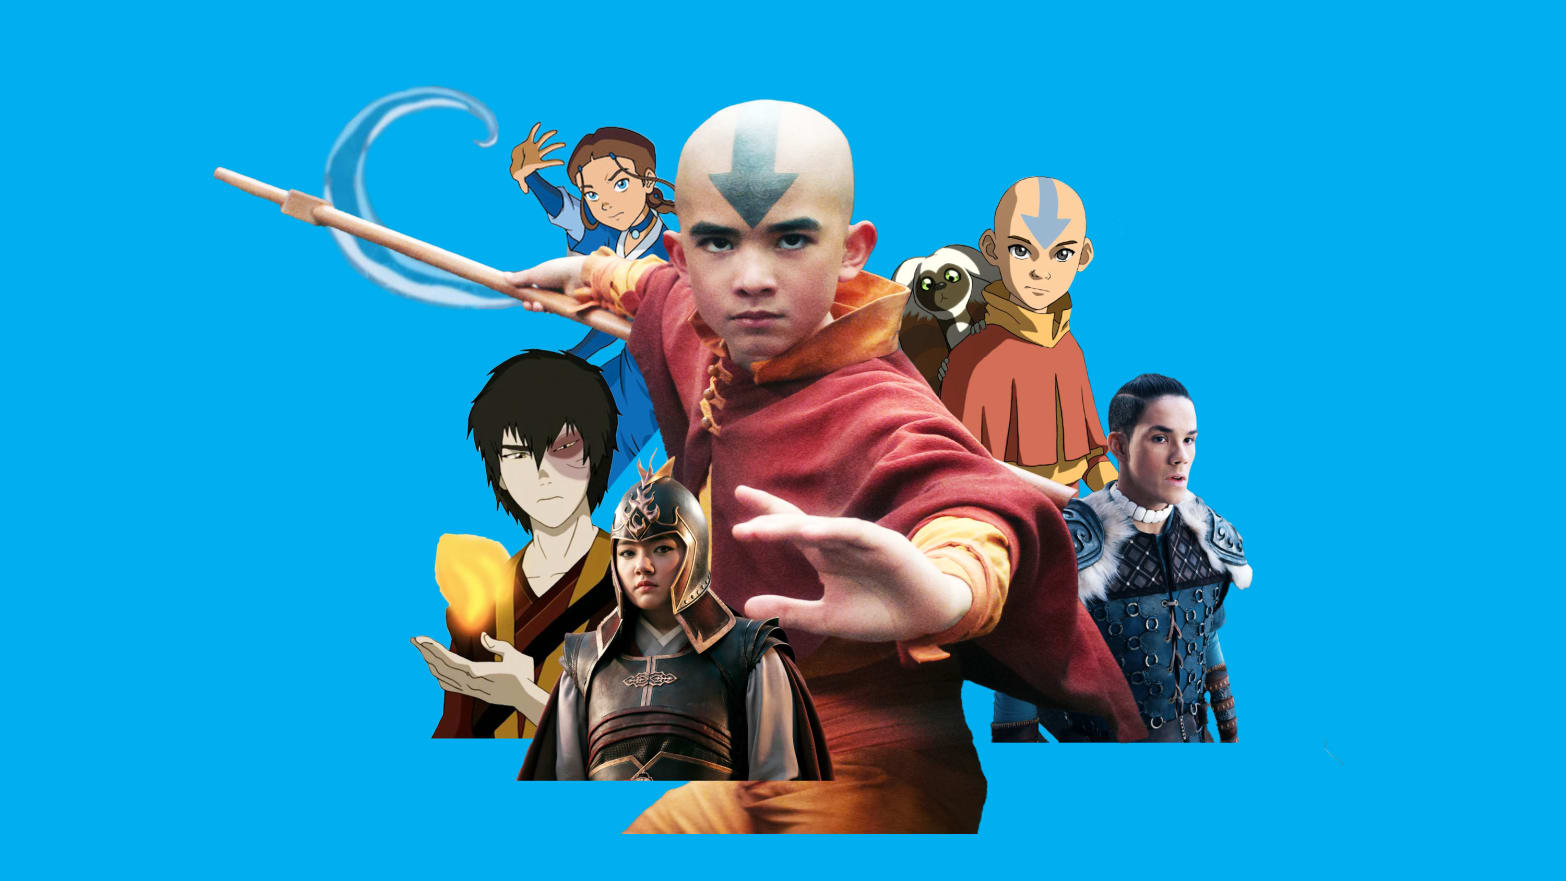 A photo collage of characters from the cartoon and new version of Avatar: The Last Airbender